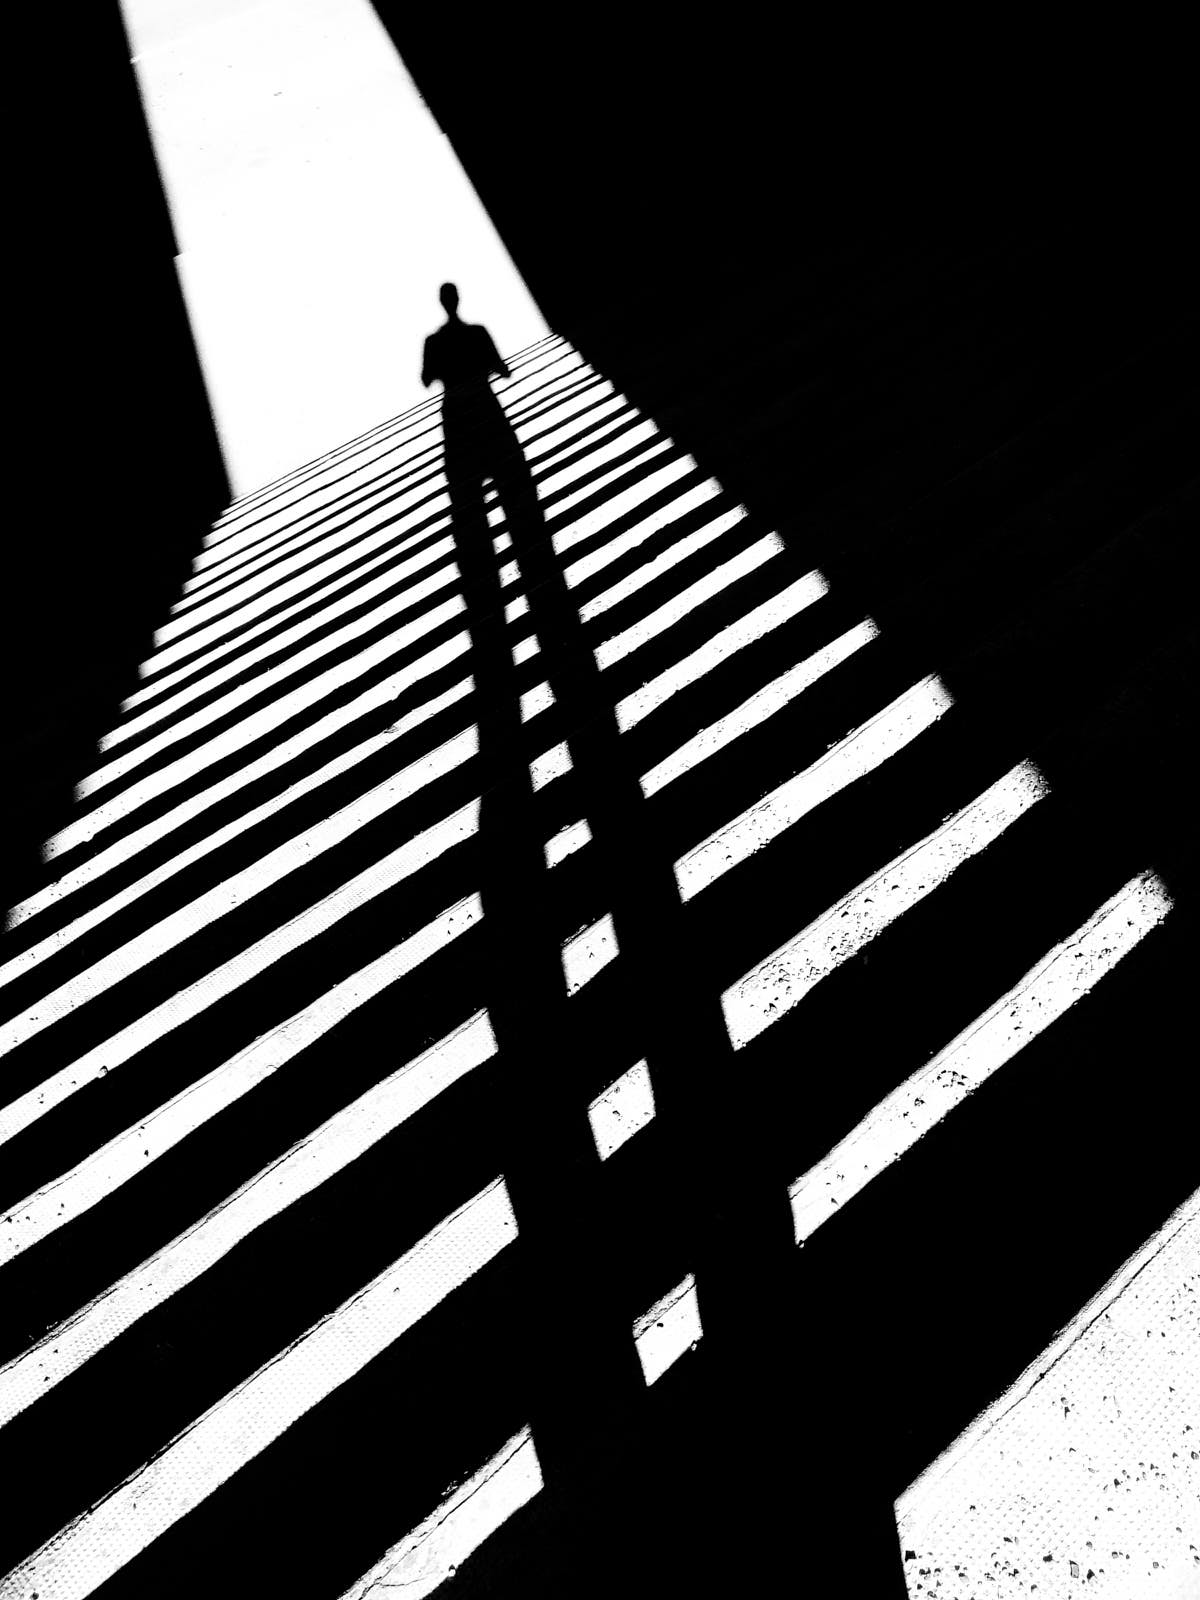 shadow in black and white street photography